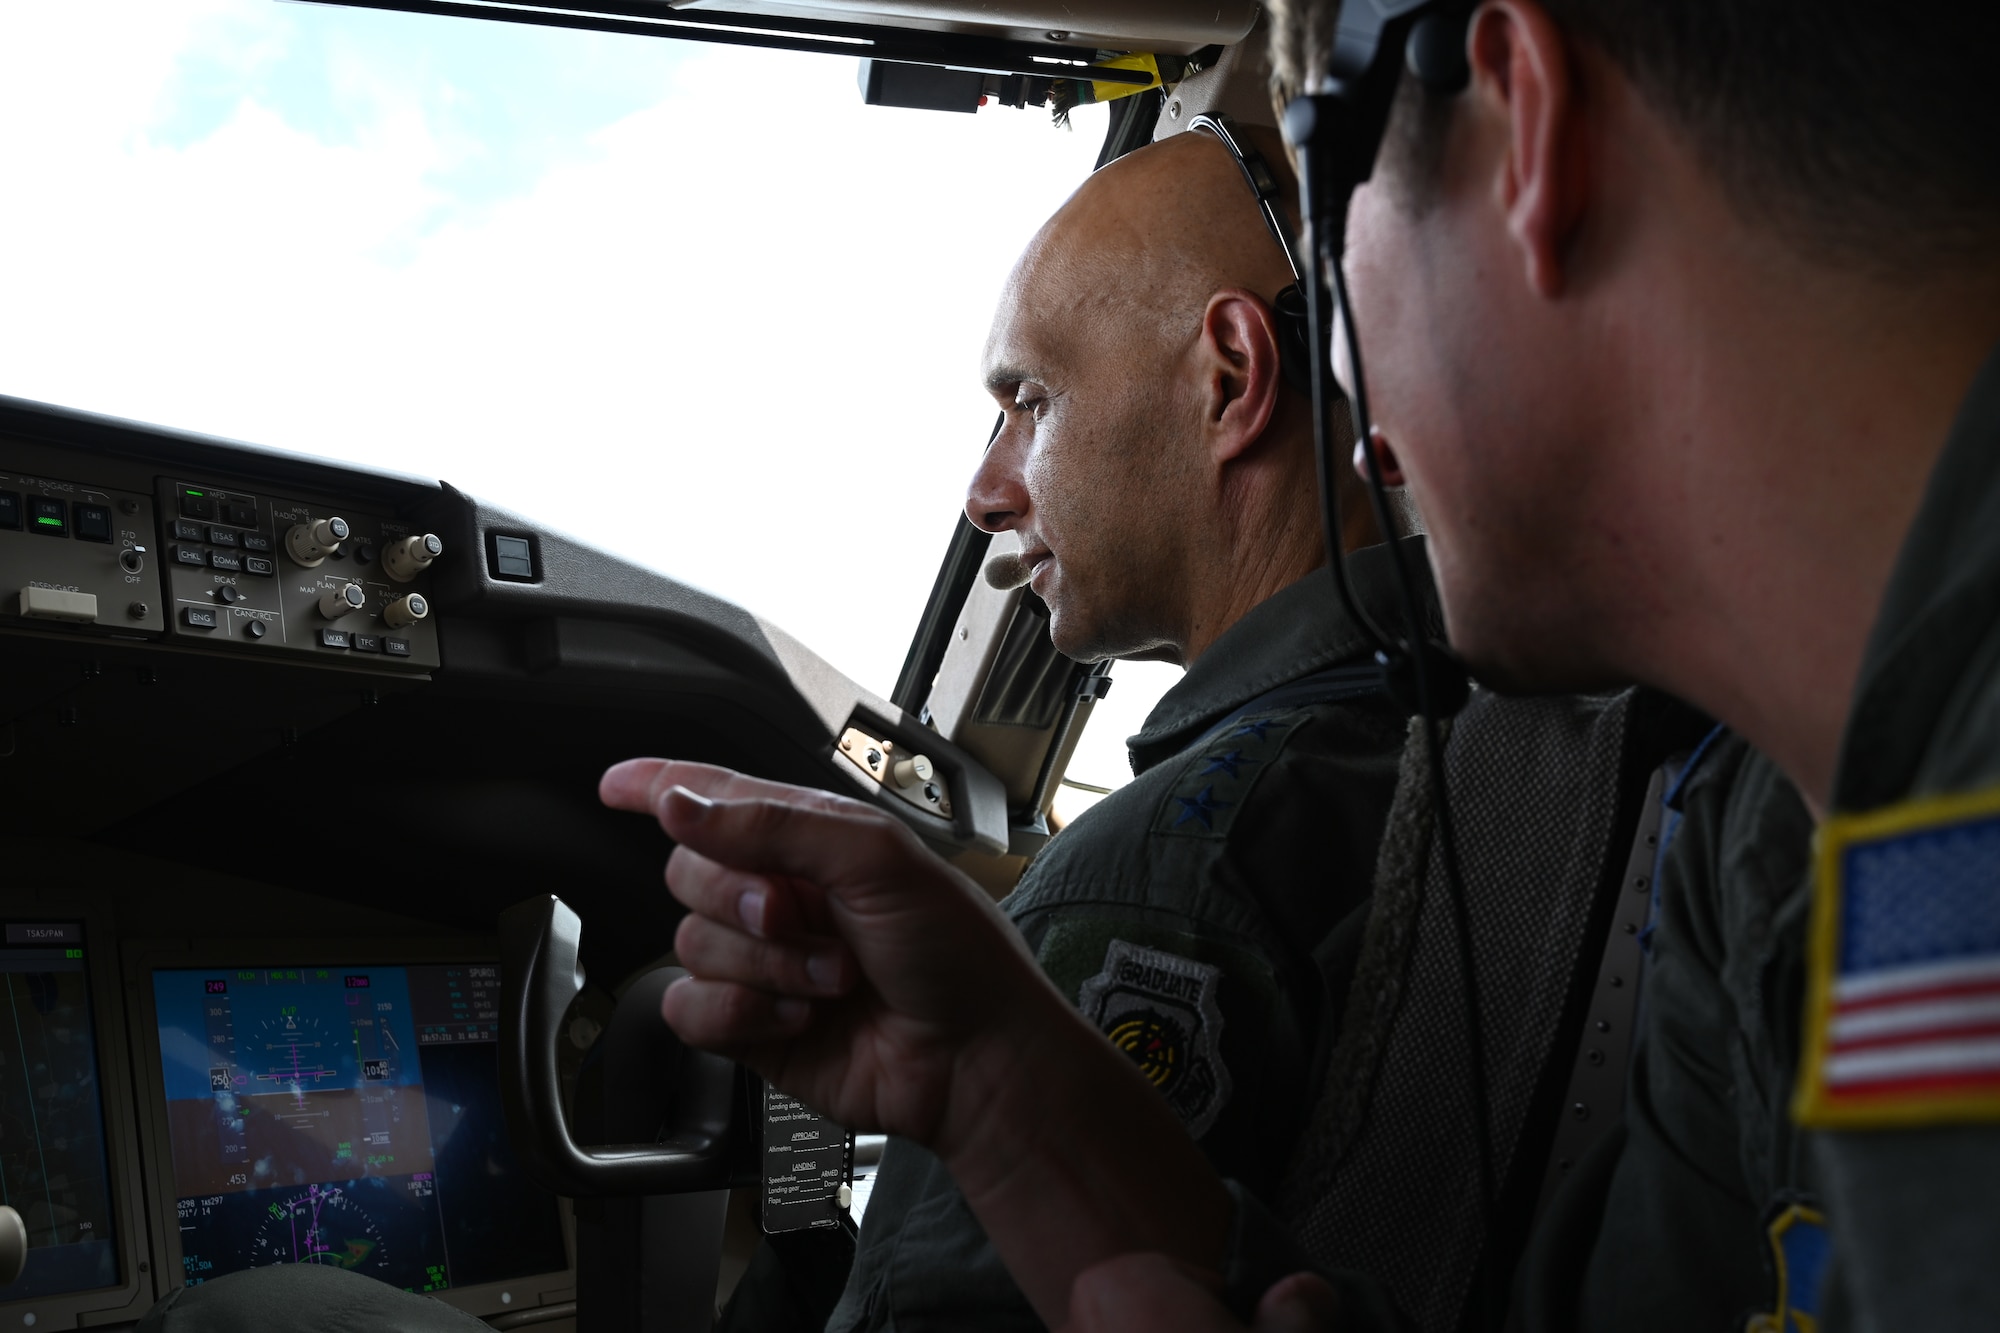 U.S. Air Force Lt. Gen. Brian Robinson, commander of Air Education and Training Command, speaks with Maj. Sean Shanahan, 56th Air Refueling Squadron instructor pilot, while flying a KC-46 Pegasus out of Altus Air Force Base, Oklahoma, Aug. 31, 2022. As part of his tour, Robinson flew the KC-46 to experience what instructors do on a regular basis. (U.S. Air Force photo by Airman 1st Class Miyah Gray)